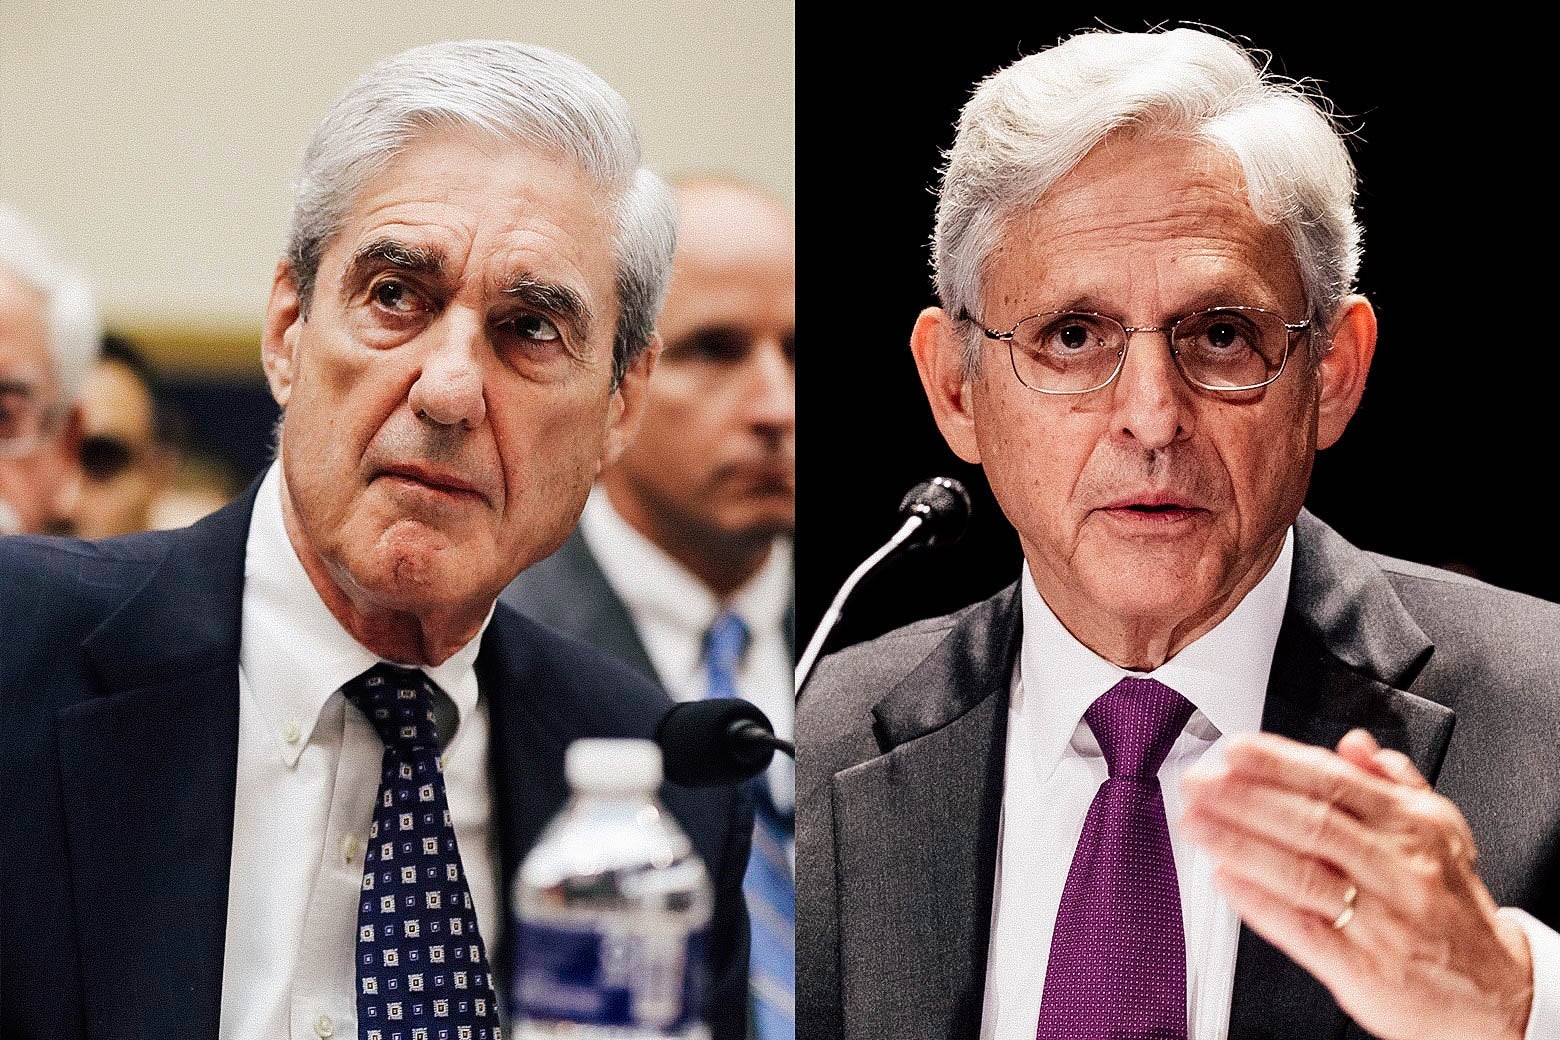 Side by side photos of Mueller and Garland